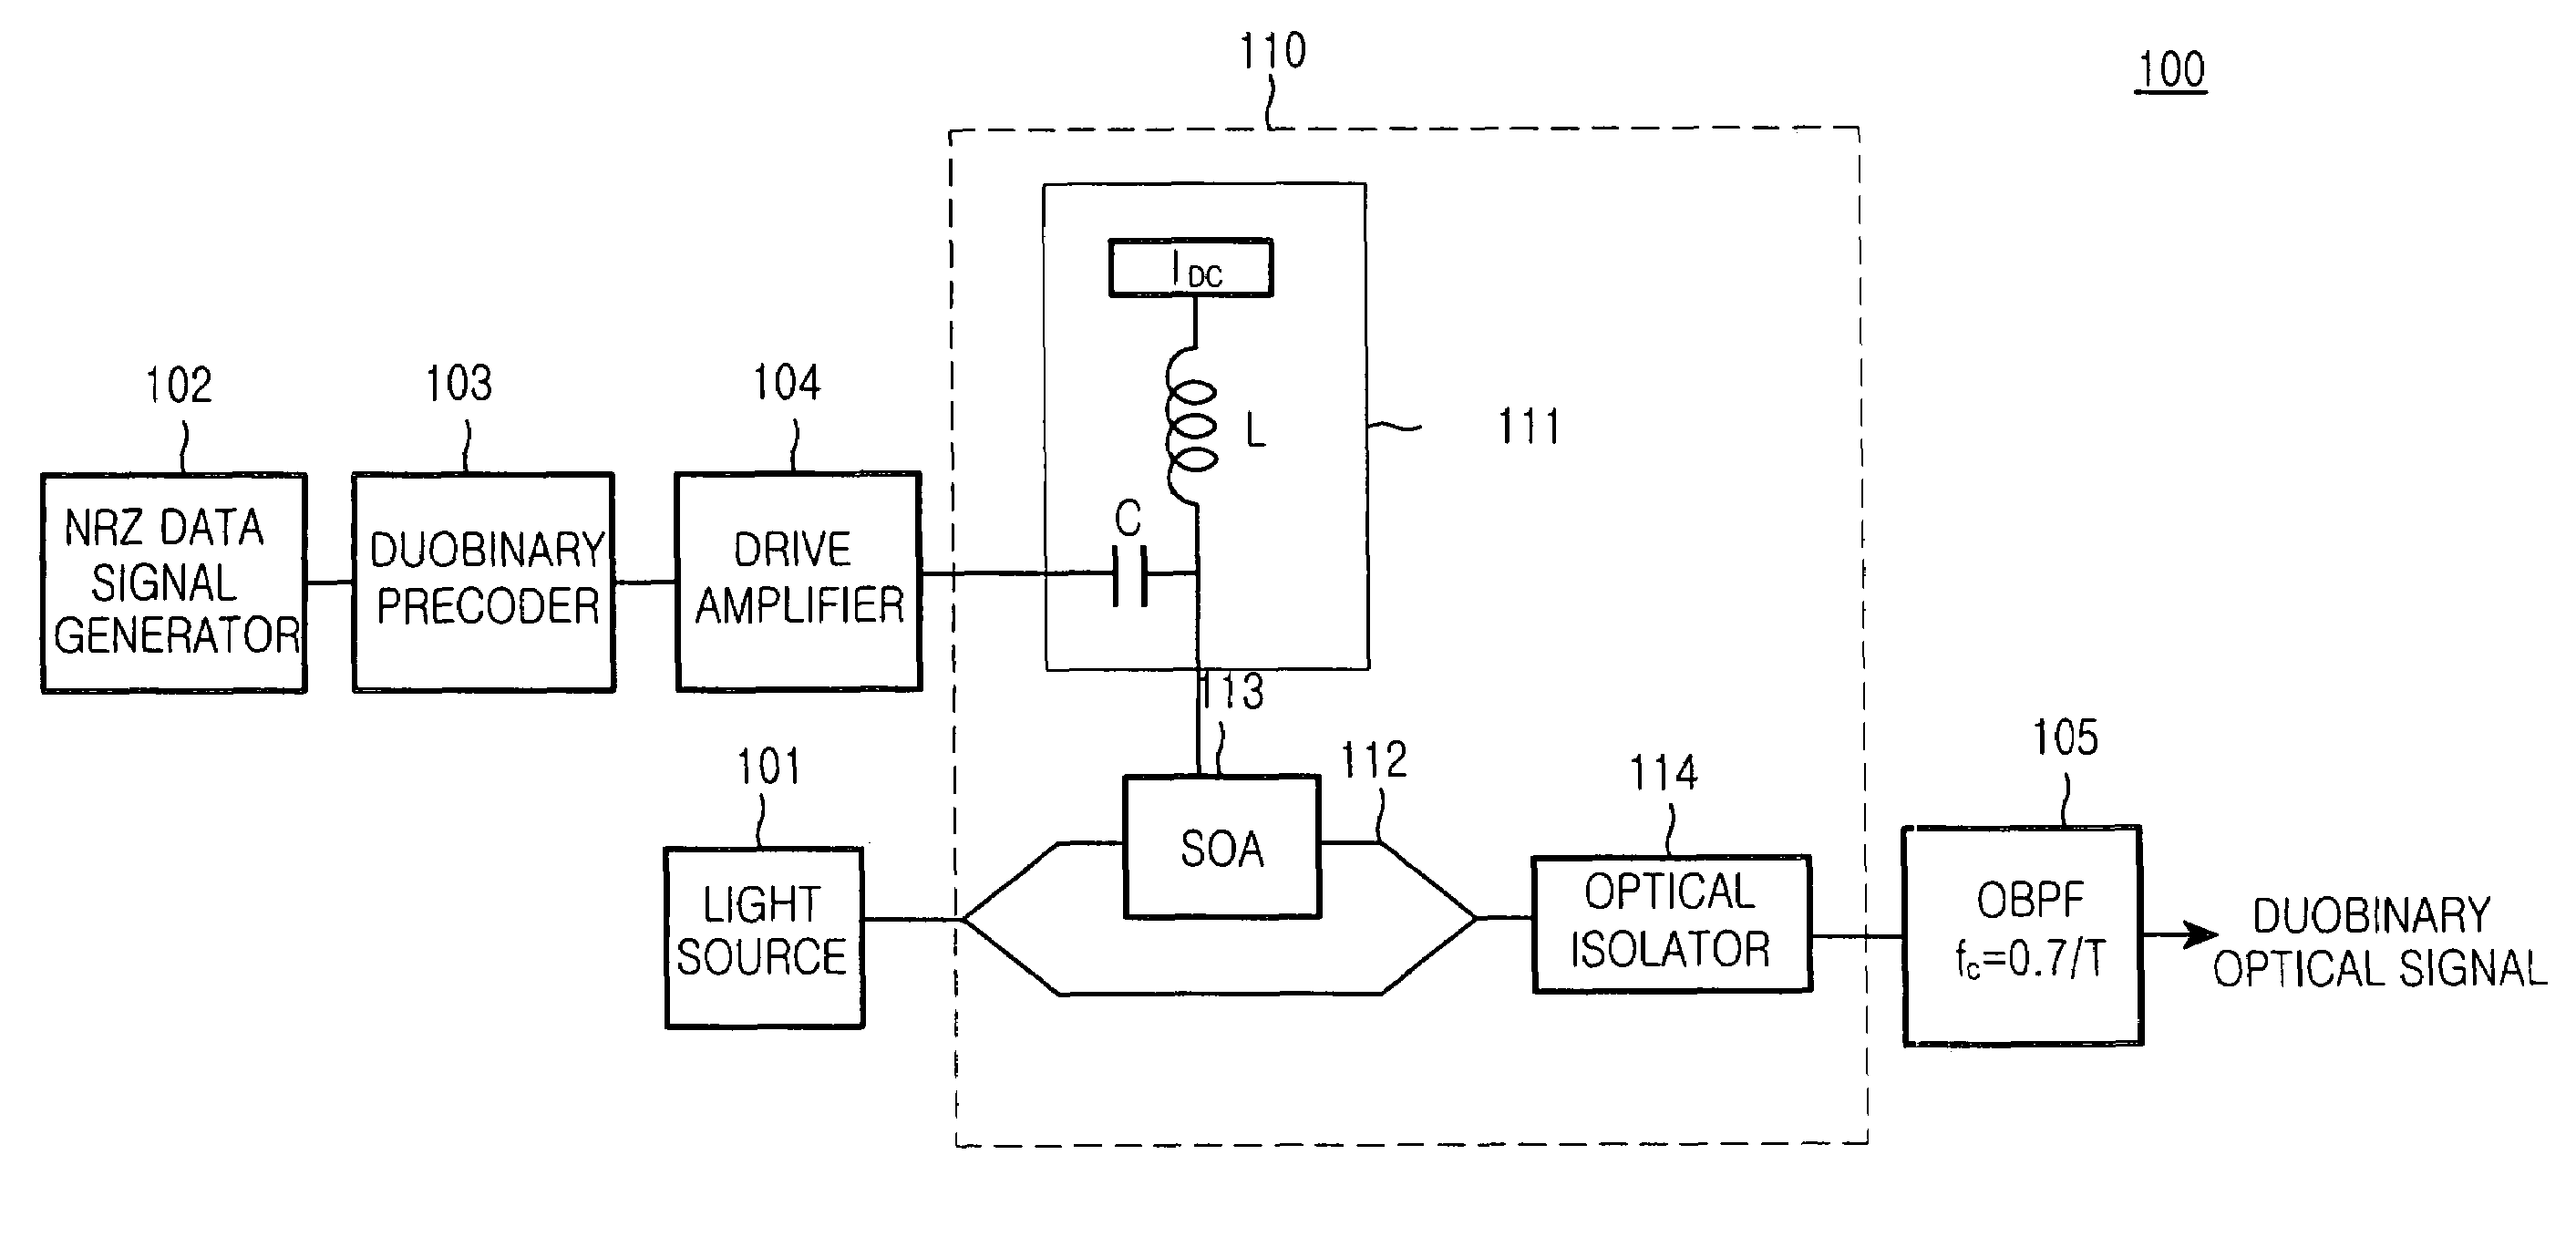 Duobinary optical transmission device using at least one semiconductor optical amplifier